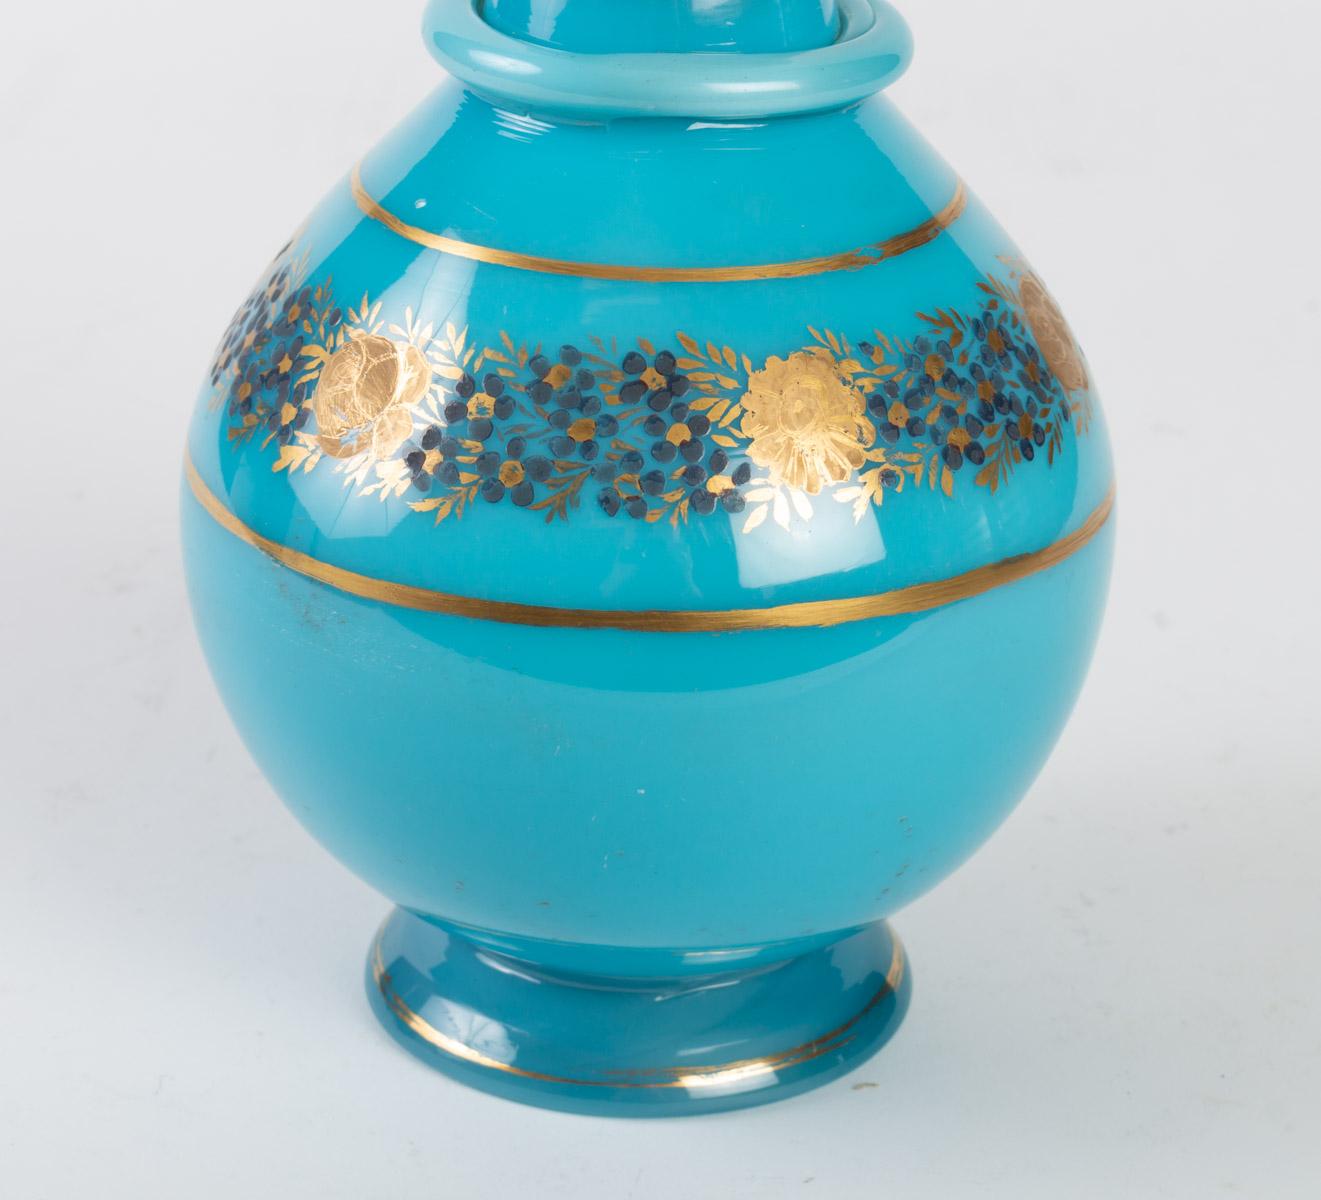 Carafe in turquoise blue opaline, gilded and enameled, Charles X period, 1830-1840

Measures: H 27 cm, D 14 cm.